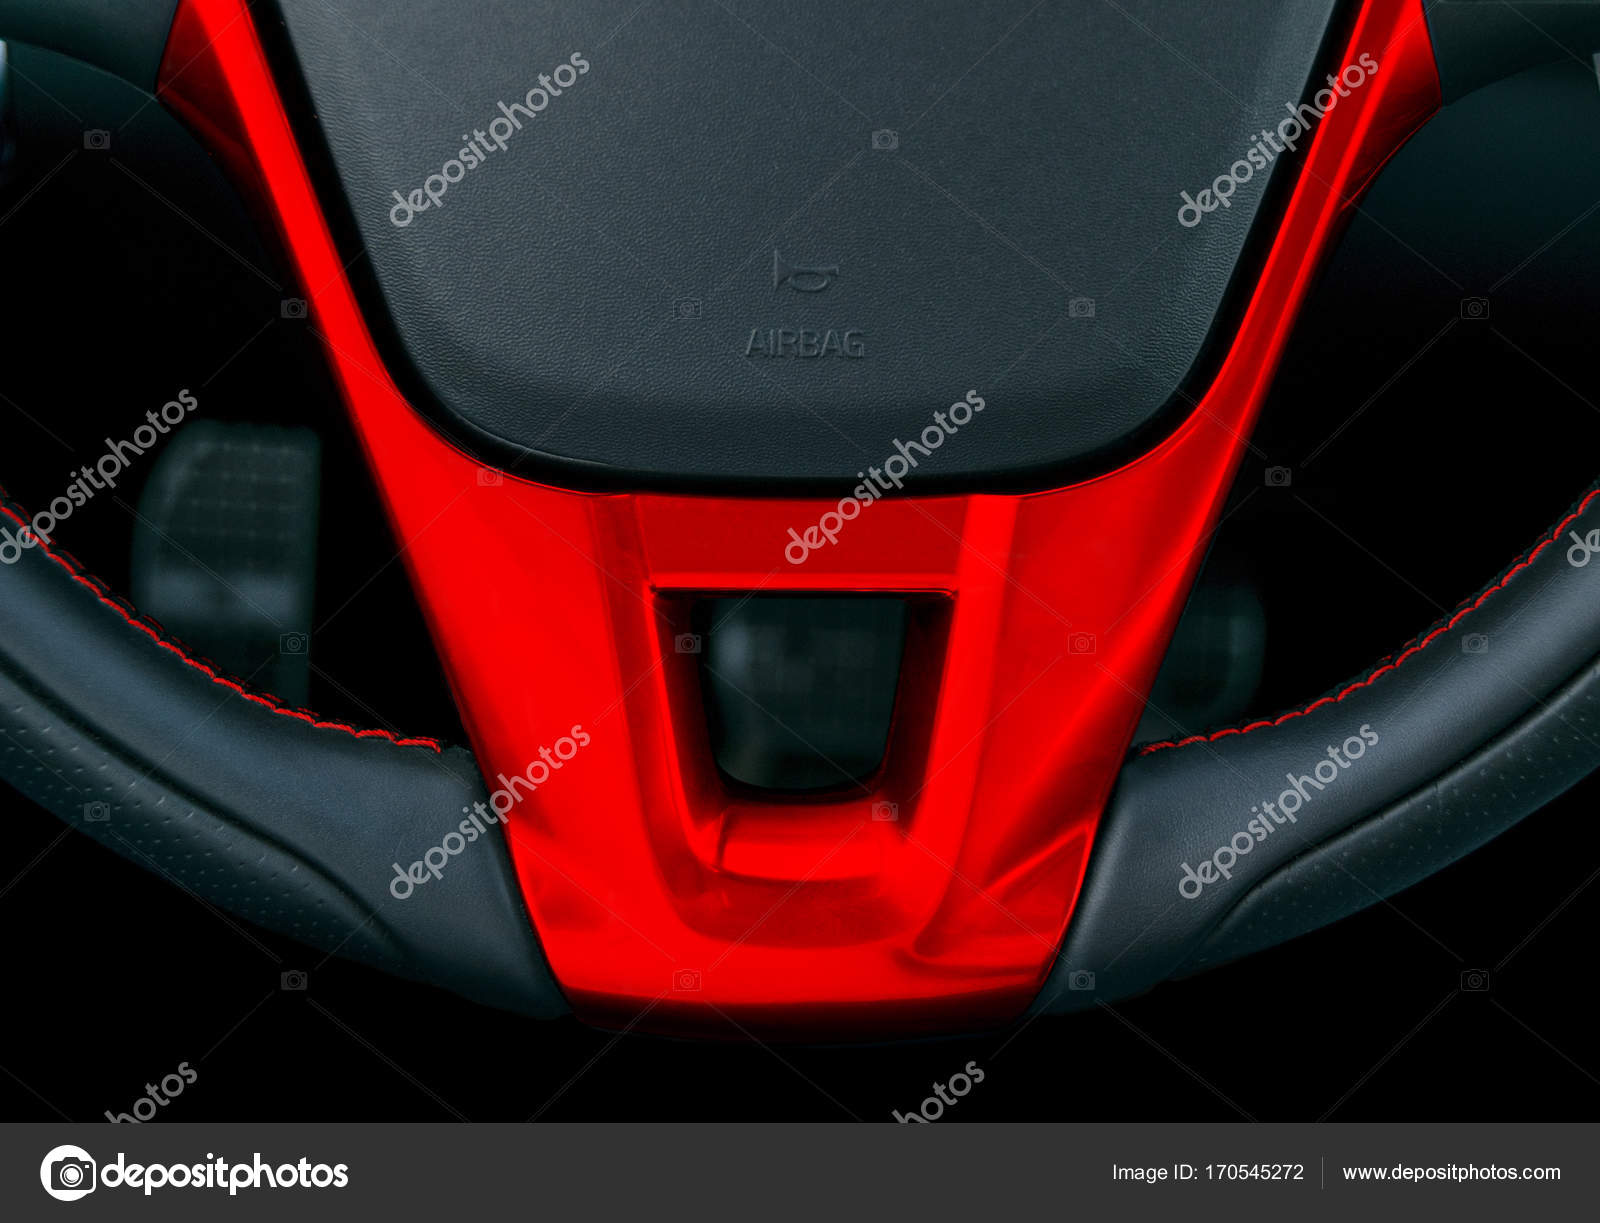 Red And Black Car Interior Design Close Up View Of